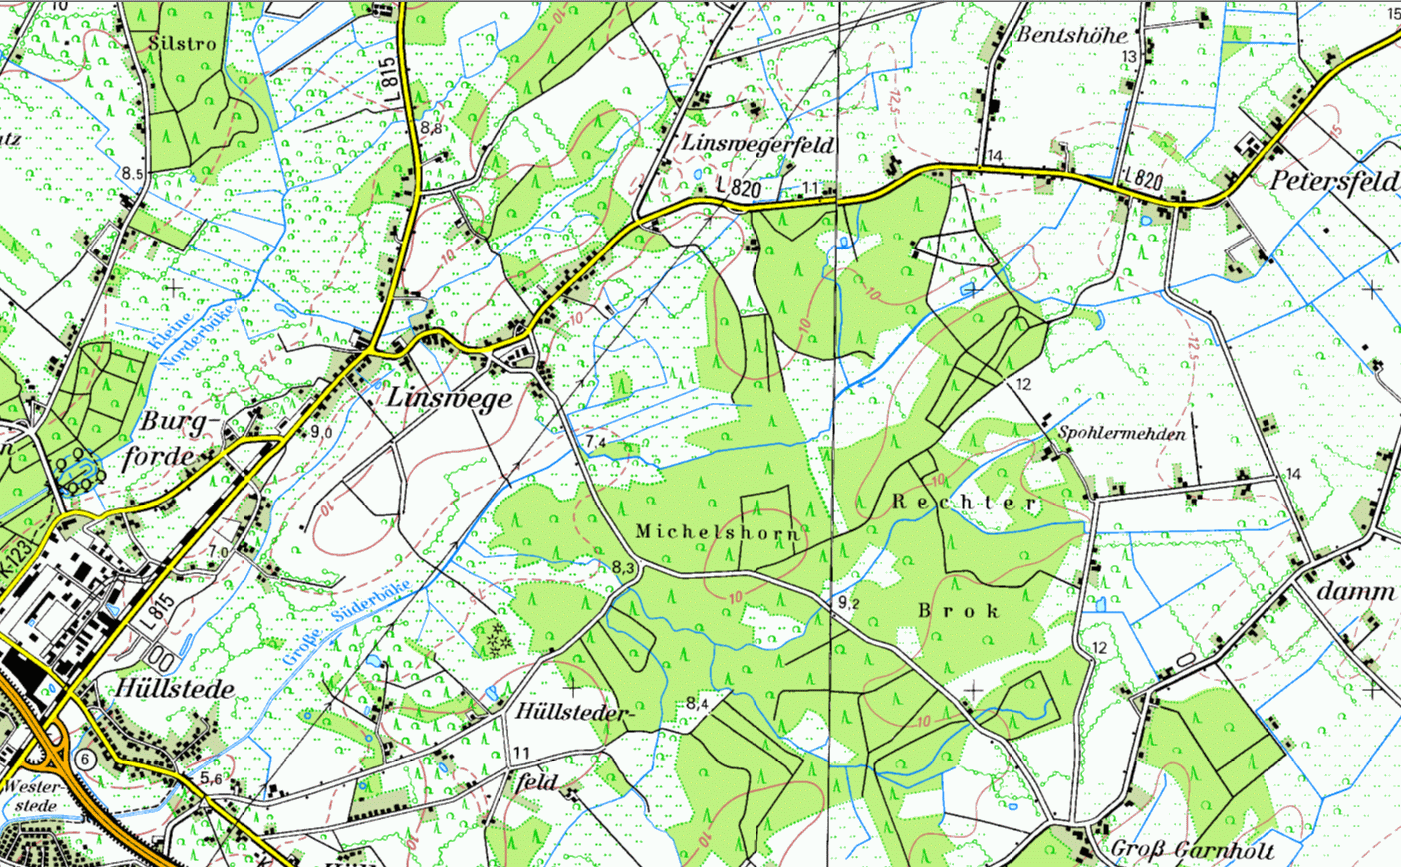 Topographic Map from Linswege (TK50-1998)